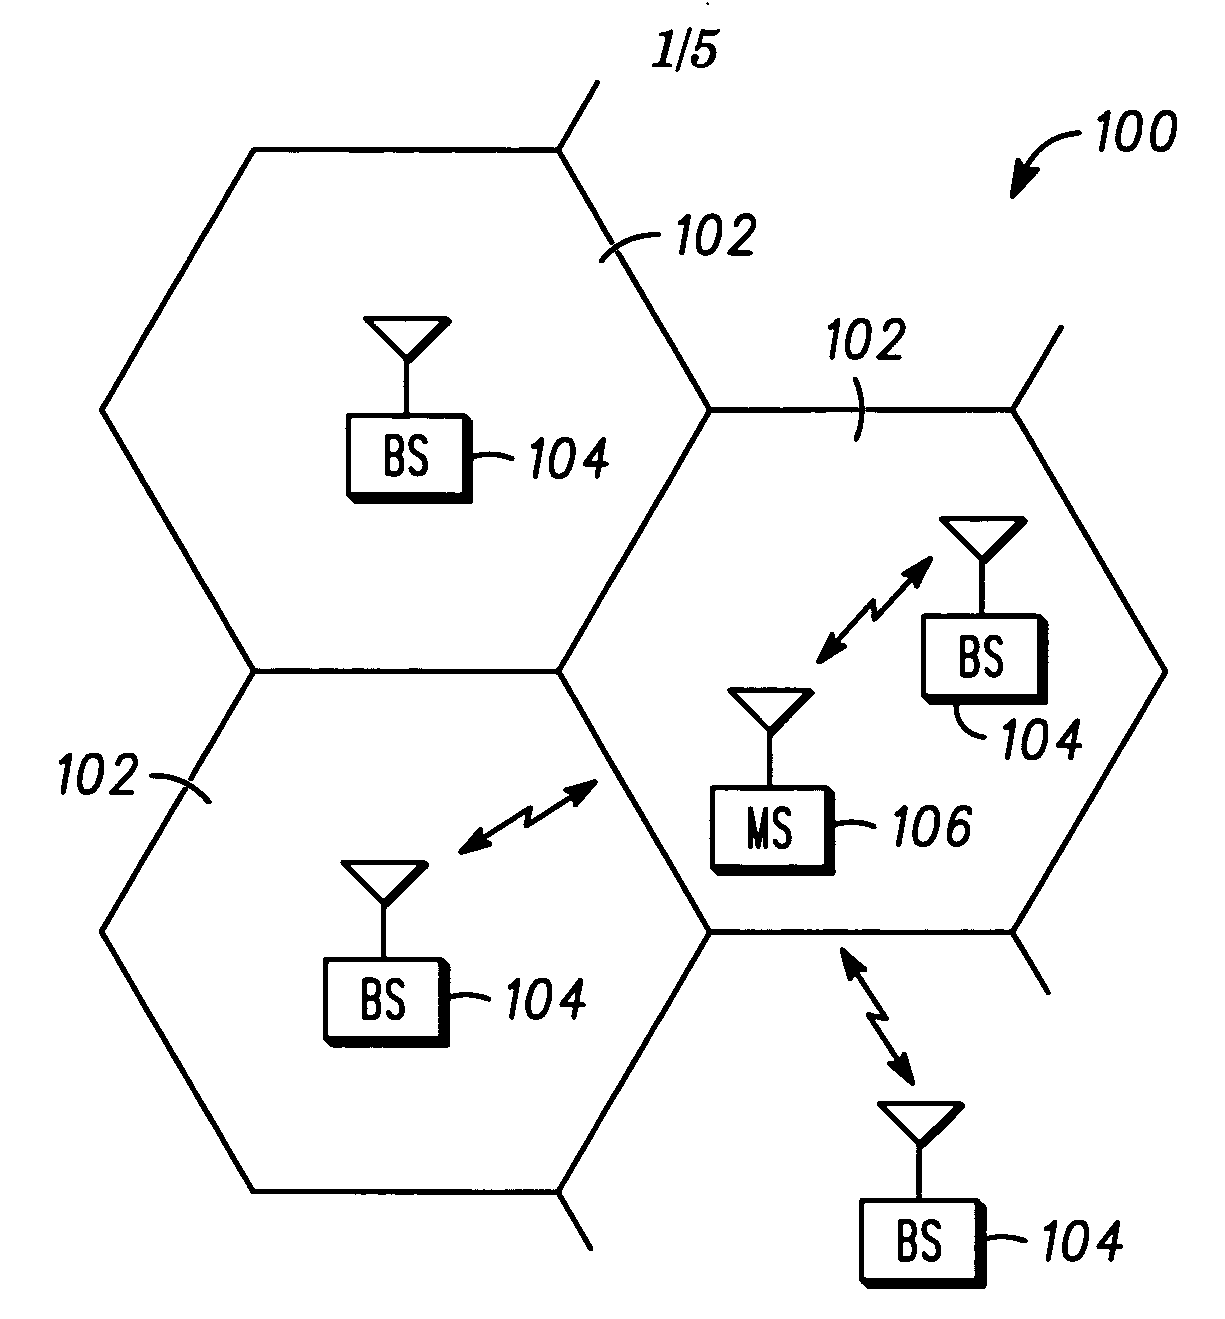 Communication controller and method for maintaining a communication connection during a cell reselection